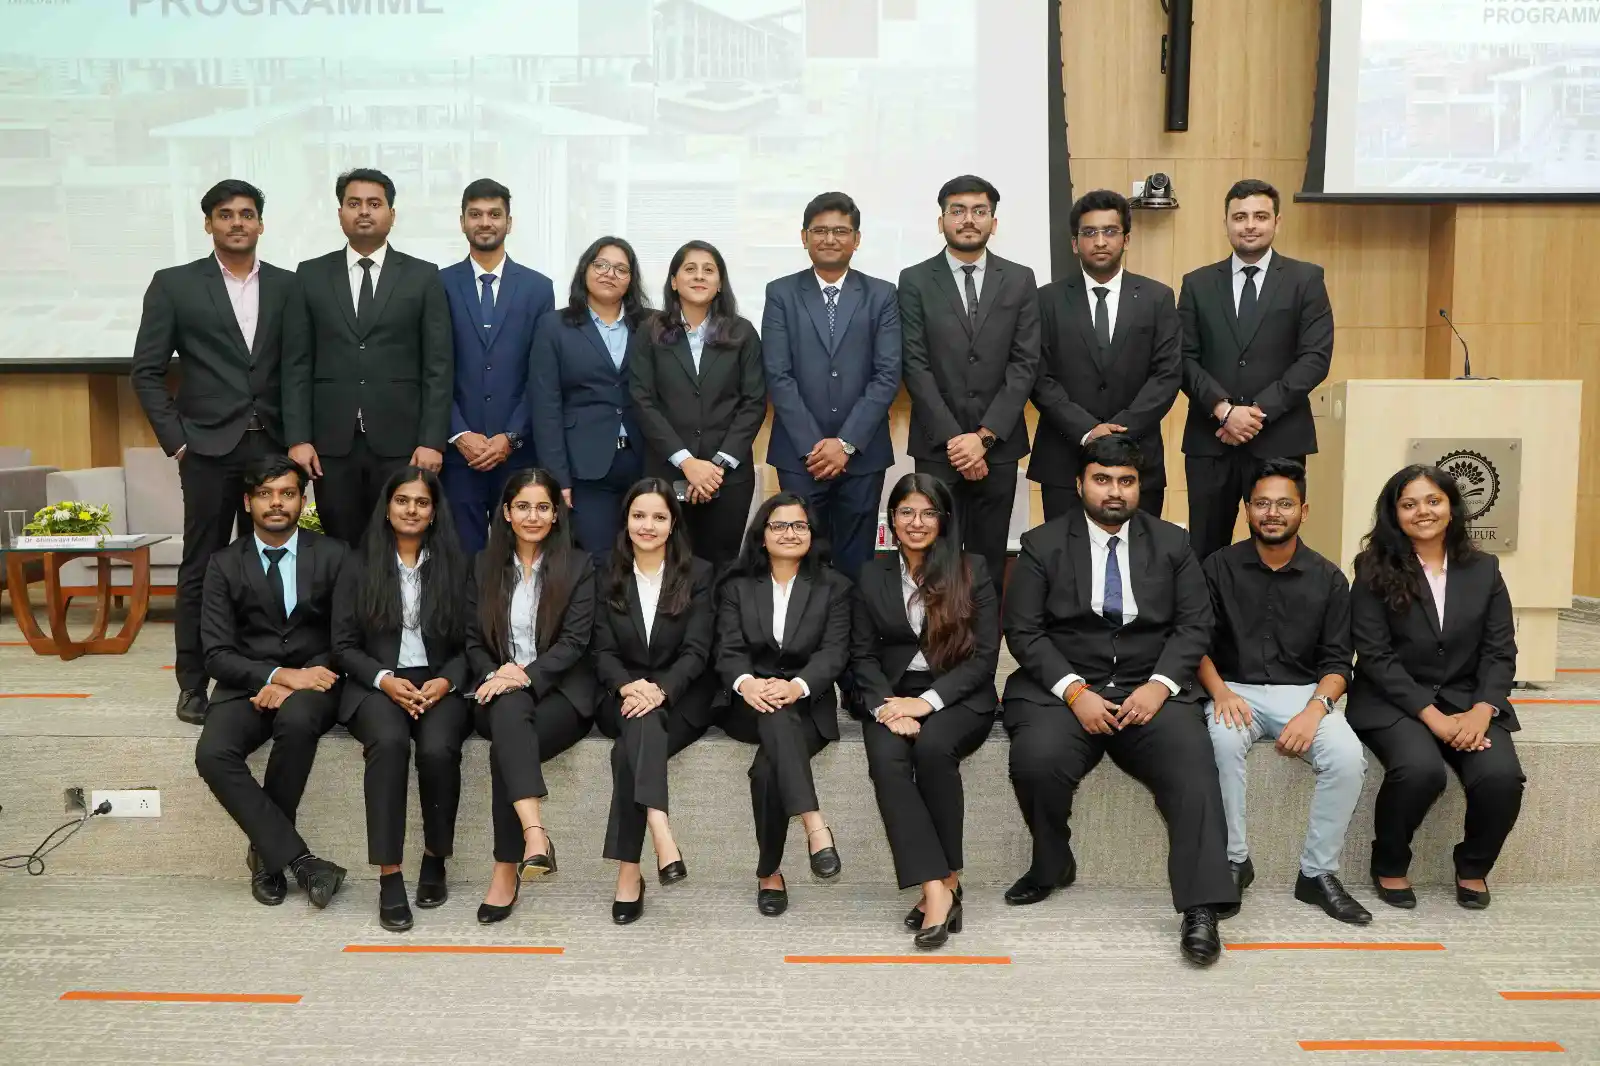 In sync with NEP 2020, IIM Nagpur committed to holistic education